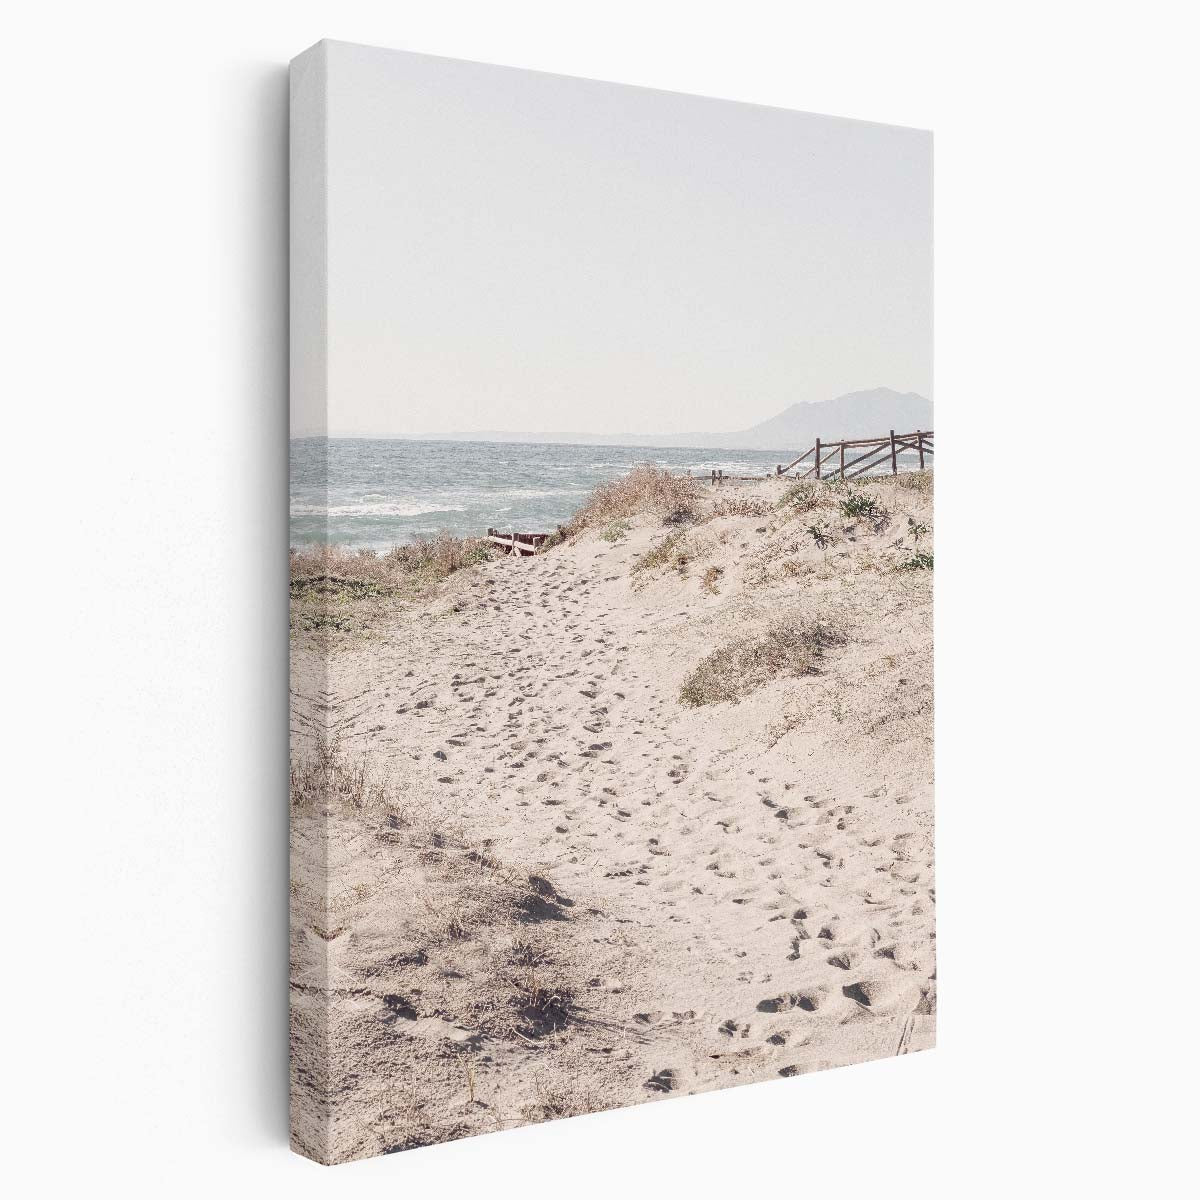 Coastal Beach Landscape Photography Seascape Shore Water Art by Luxuriance Designs, made in USA